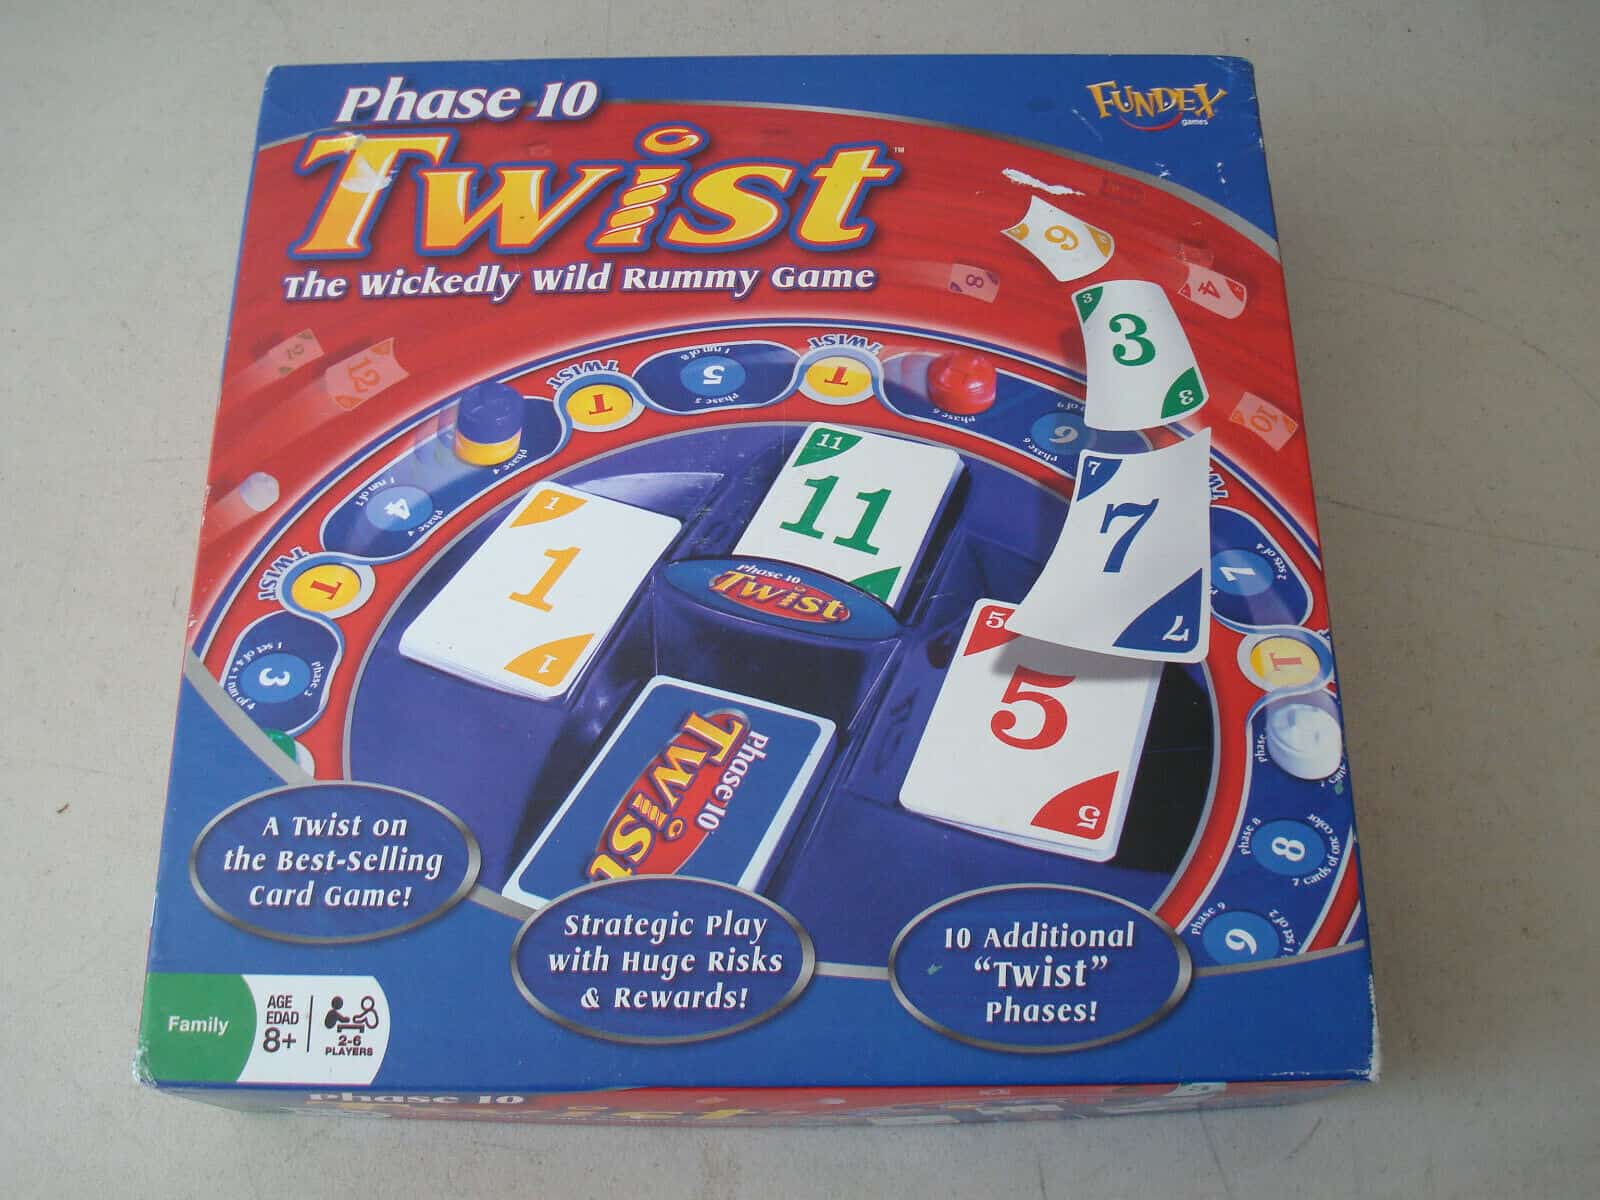 Phase 10 [Discontinued by Manufacturer] For 7 years and up